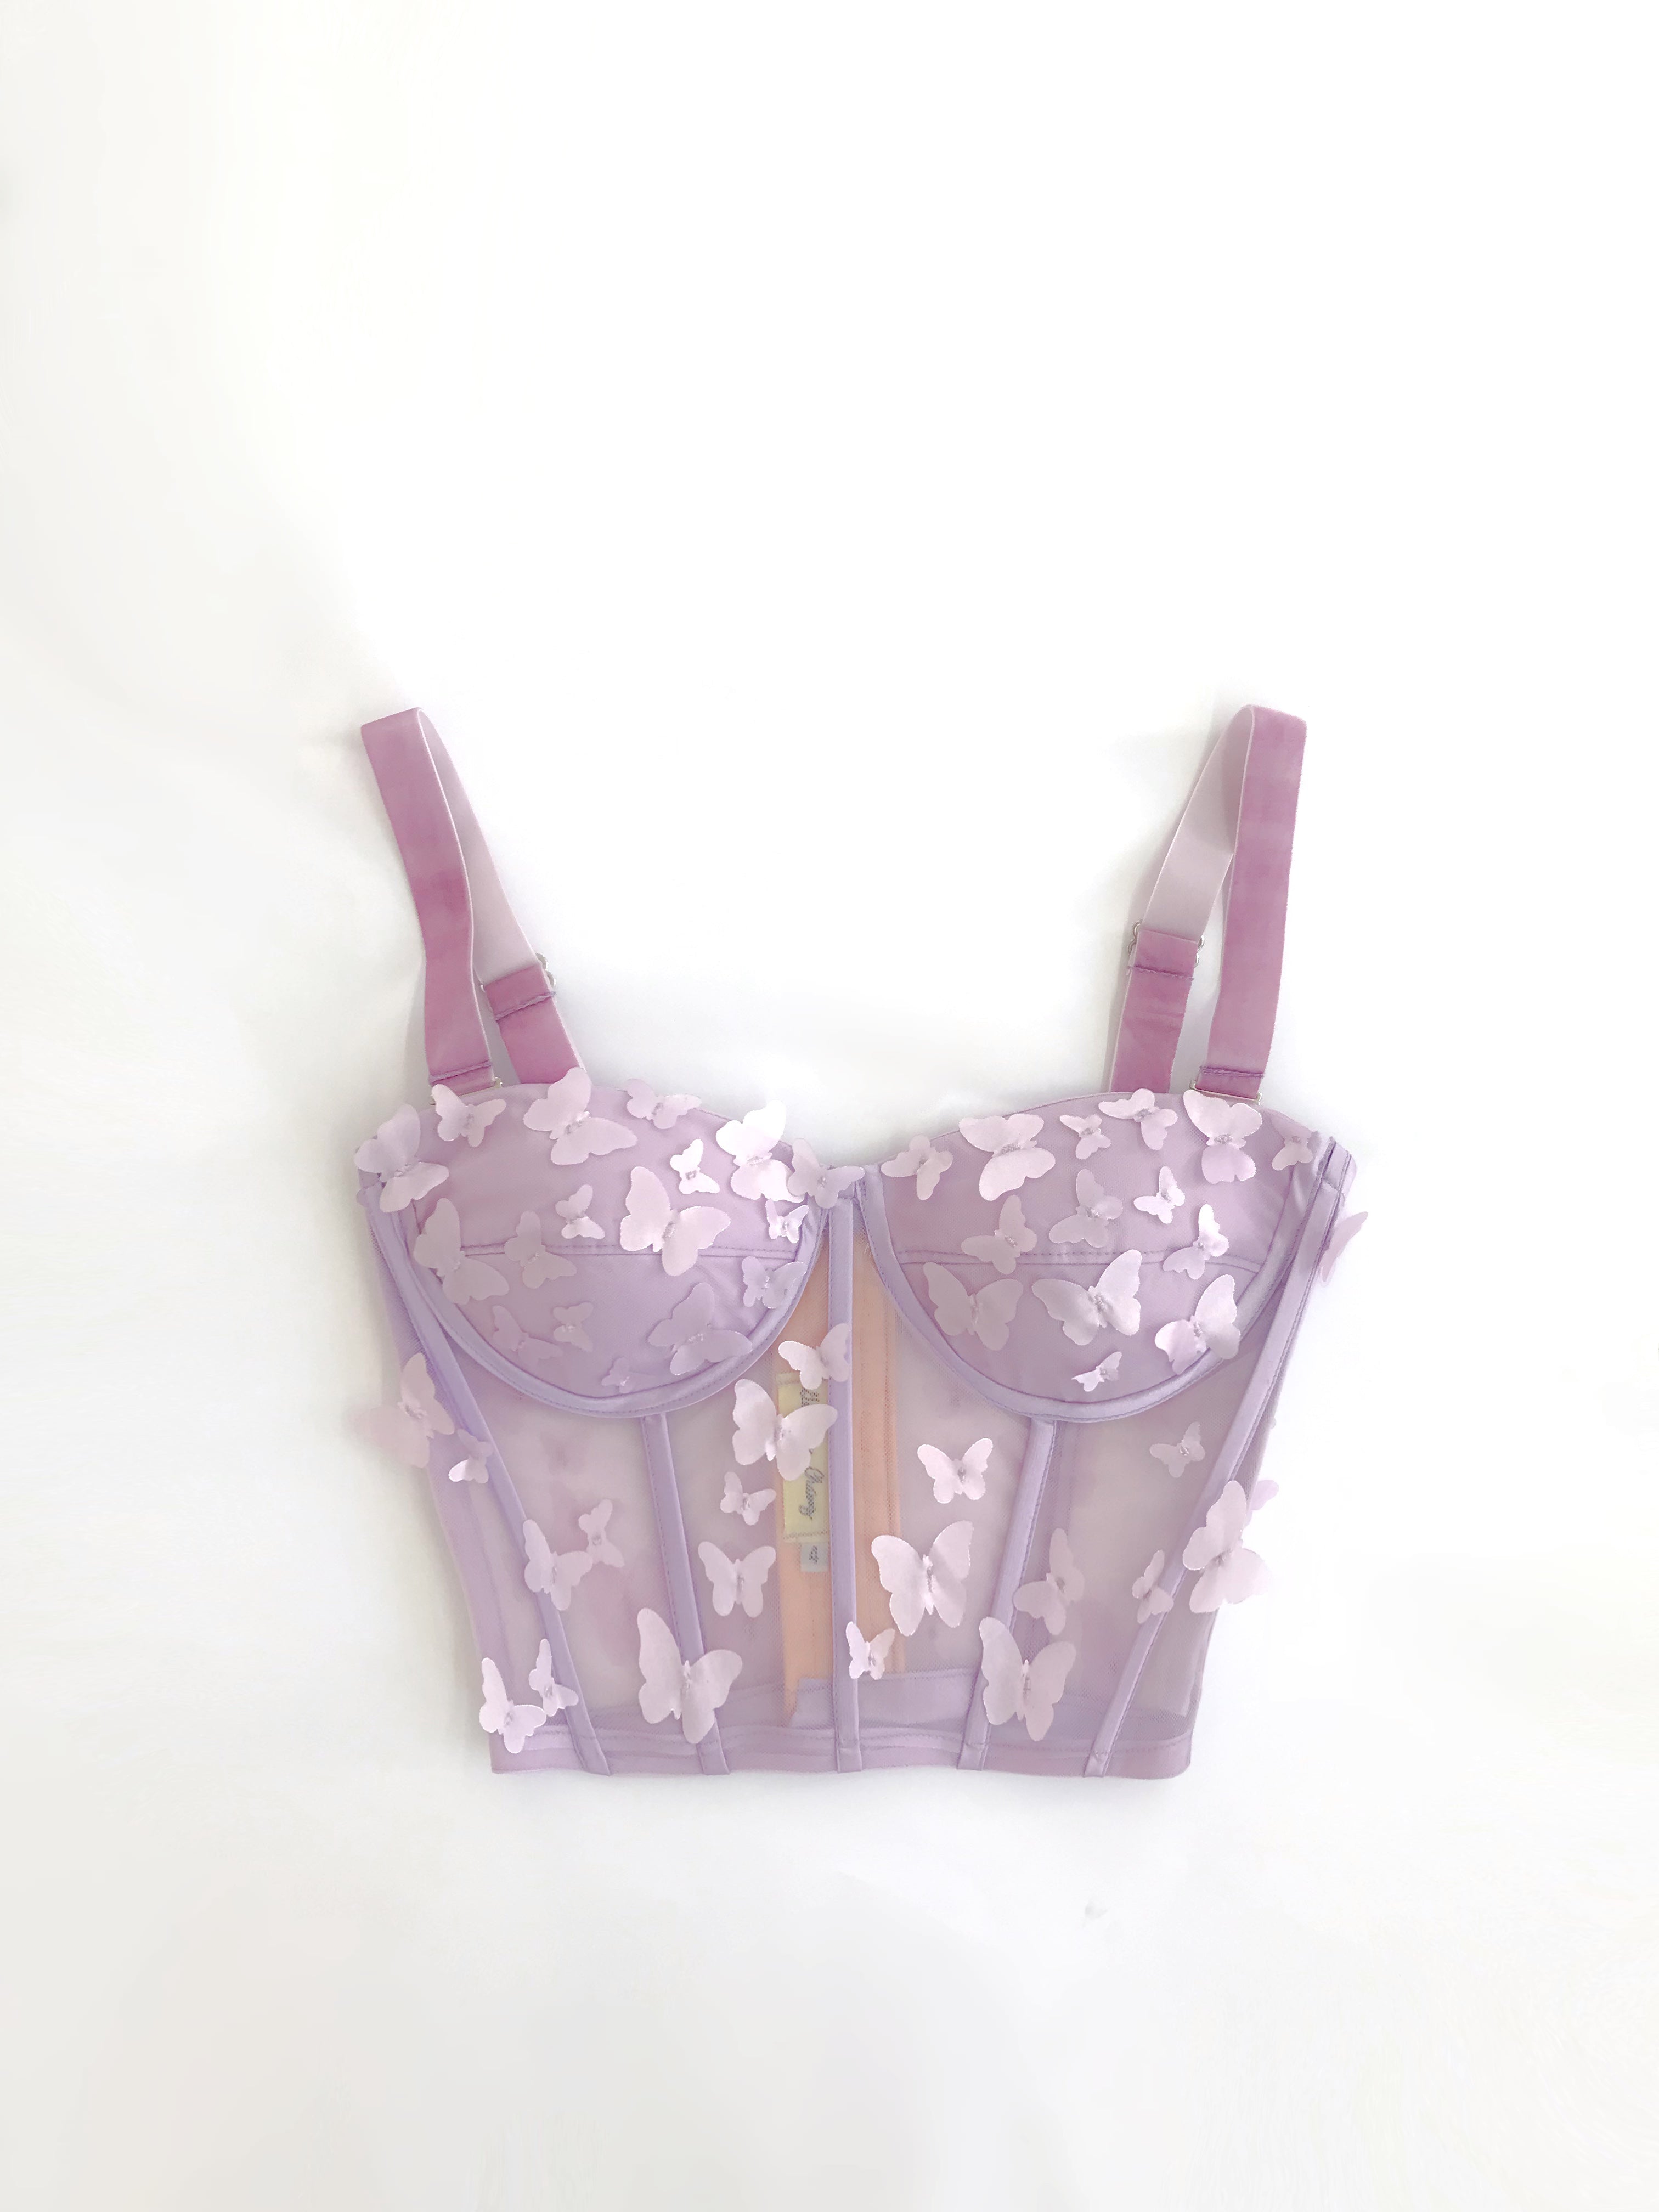 Lilac Butterfly Short Bustier Removable Straps Size 8 Cup A IMMEDIATE SHIPPING/DELIVERY